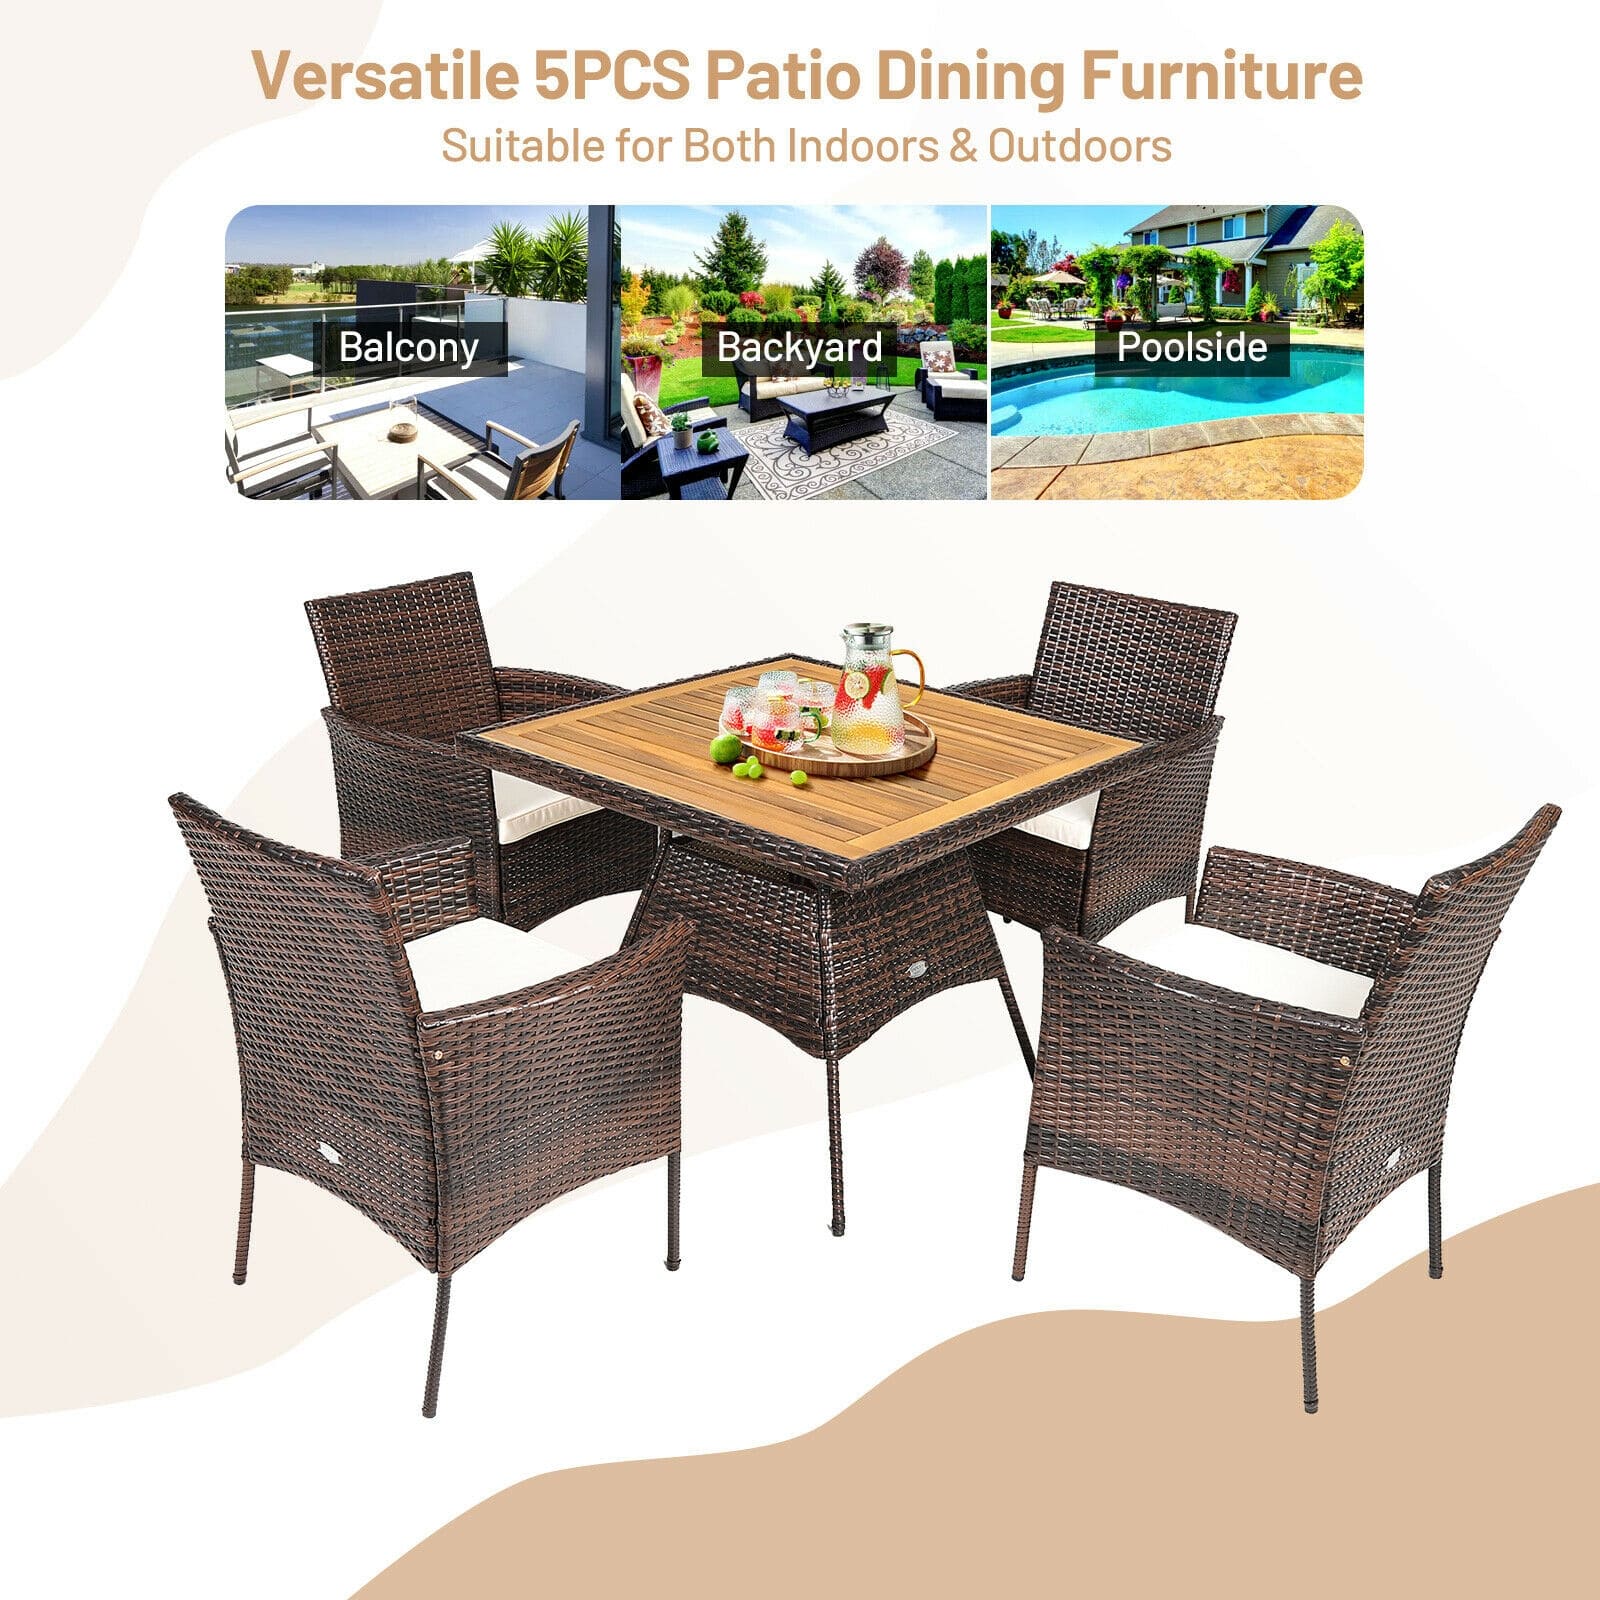 5 Pcs Rattan Patio Dining Table Set with Umbrella Hole, Acacia Wood Tabletop & 4 Cushioned Armchairs